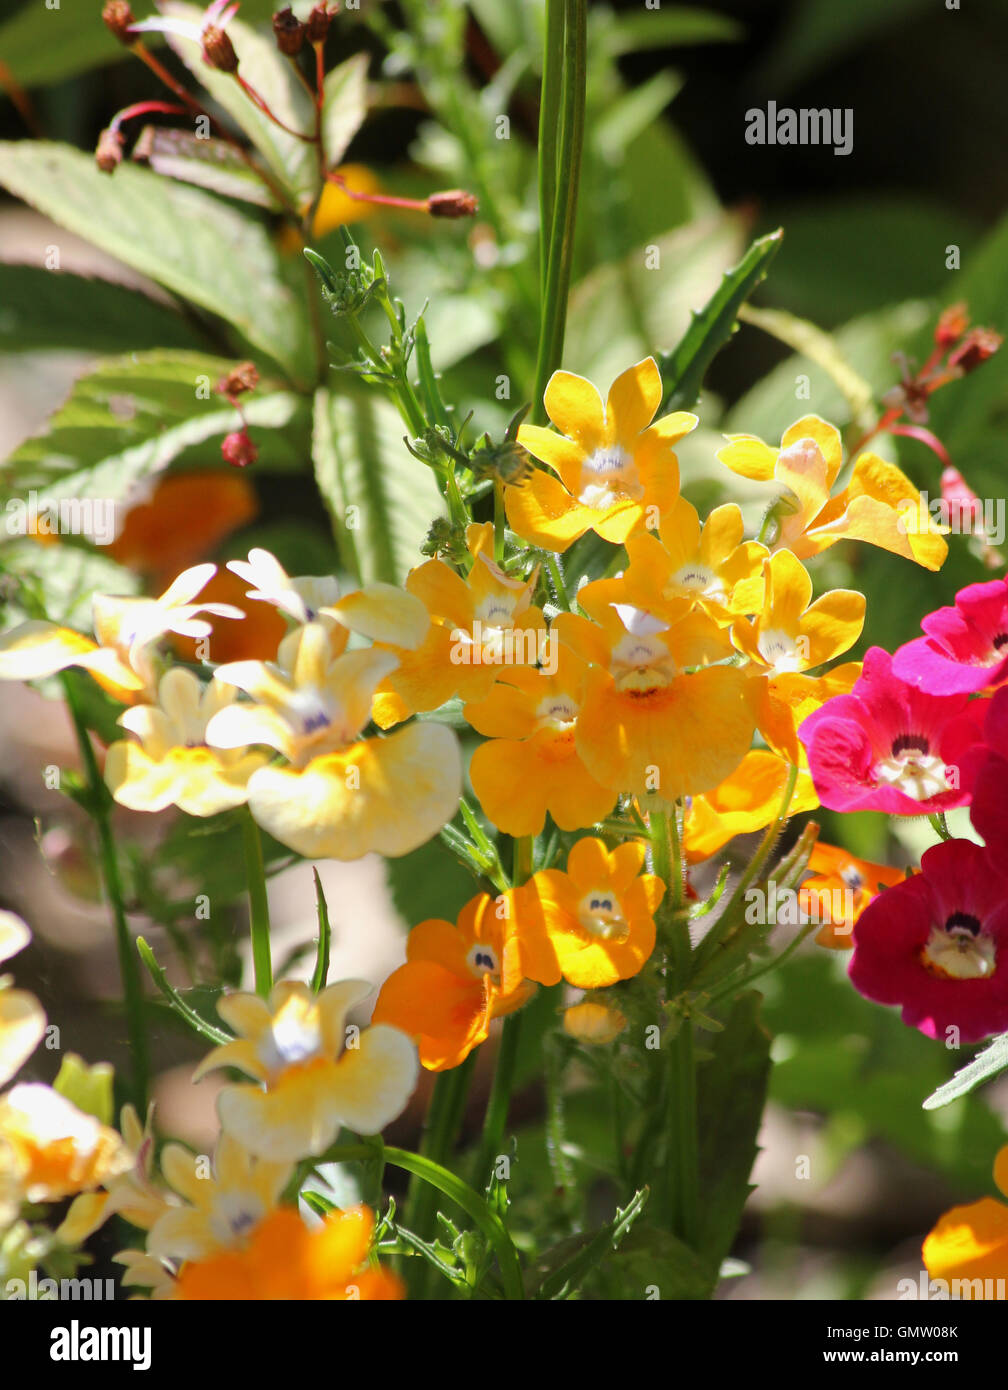 Yellow and pink nemesia 'tapestry' flowers in dappled sunshine with leaves and seeds of Gillenia trifoliata in background Stock Photo